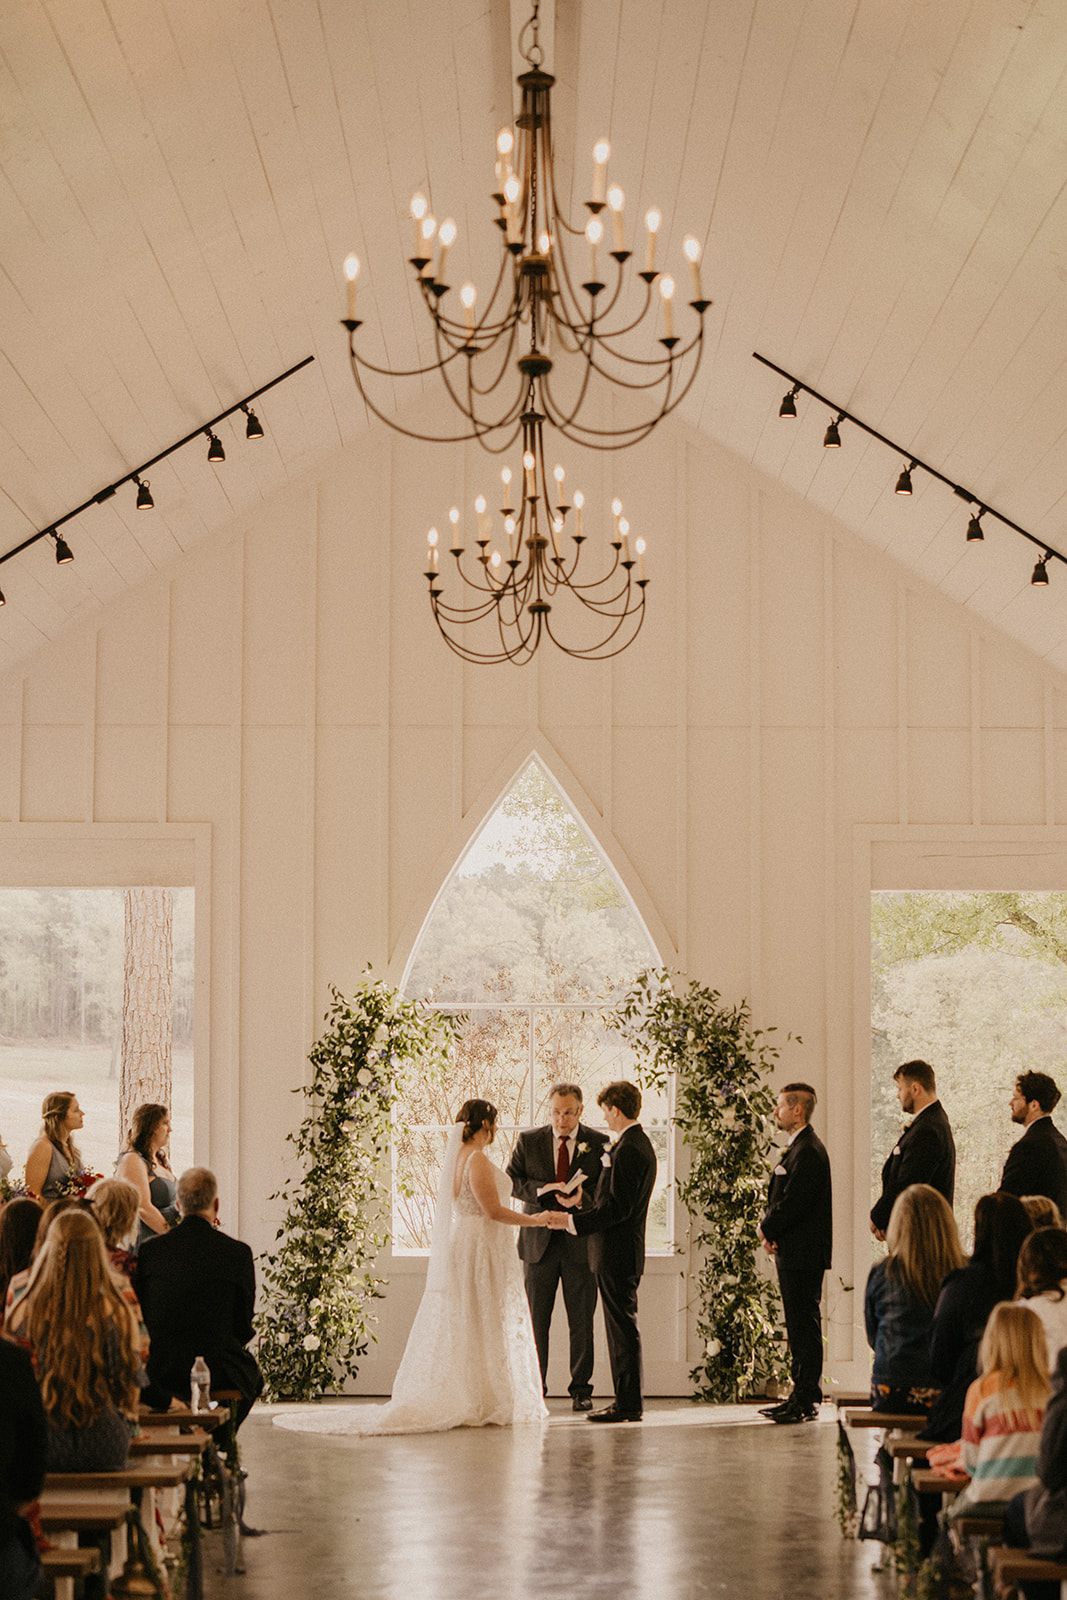 Outdoor East Texas barn Wedding at the Venue at Orchard Farms with scenic farmland backdrop